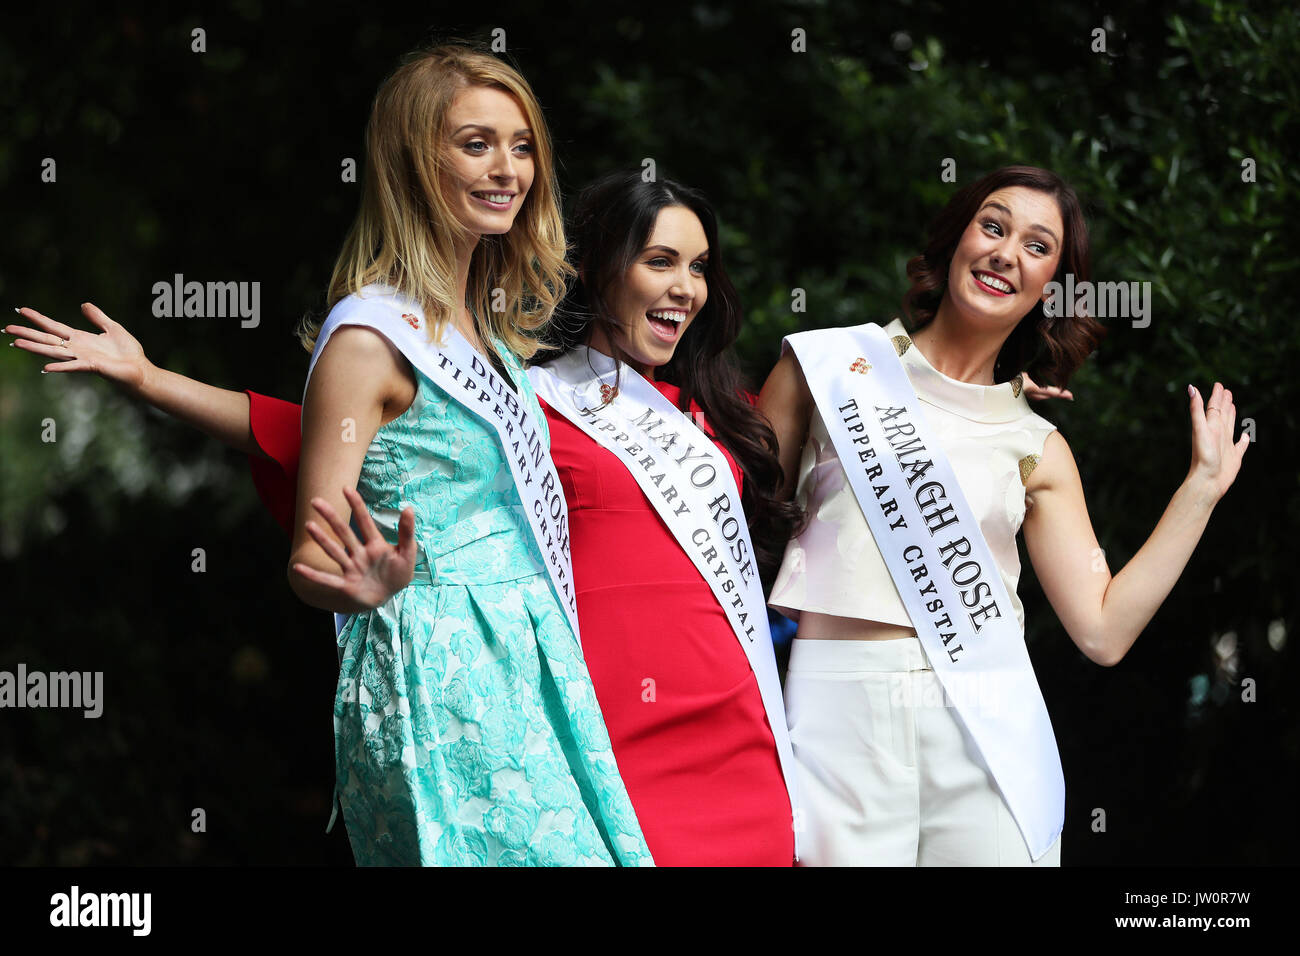 Dublin rose Maria Coughlan (left), Mayo rose Sandra Ganley (centre) and  Armagh rose Nicole McKeown who are preparing for their journey to Tralee,  for the Rose of Tralee International Festival, take part